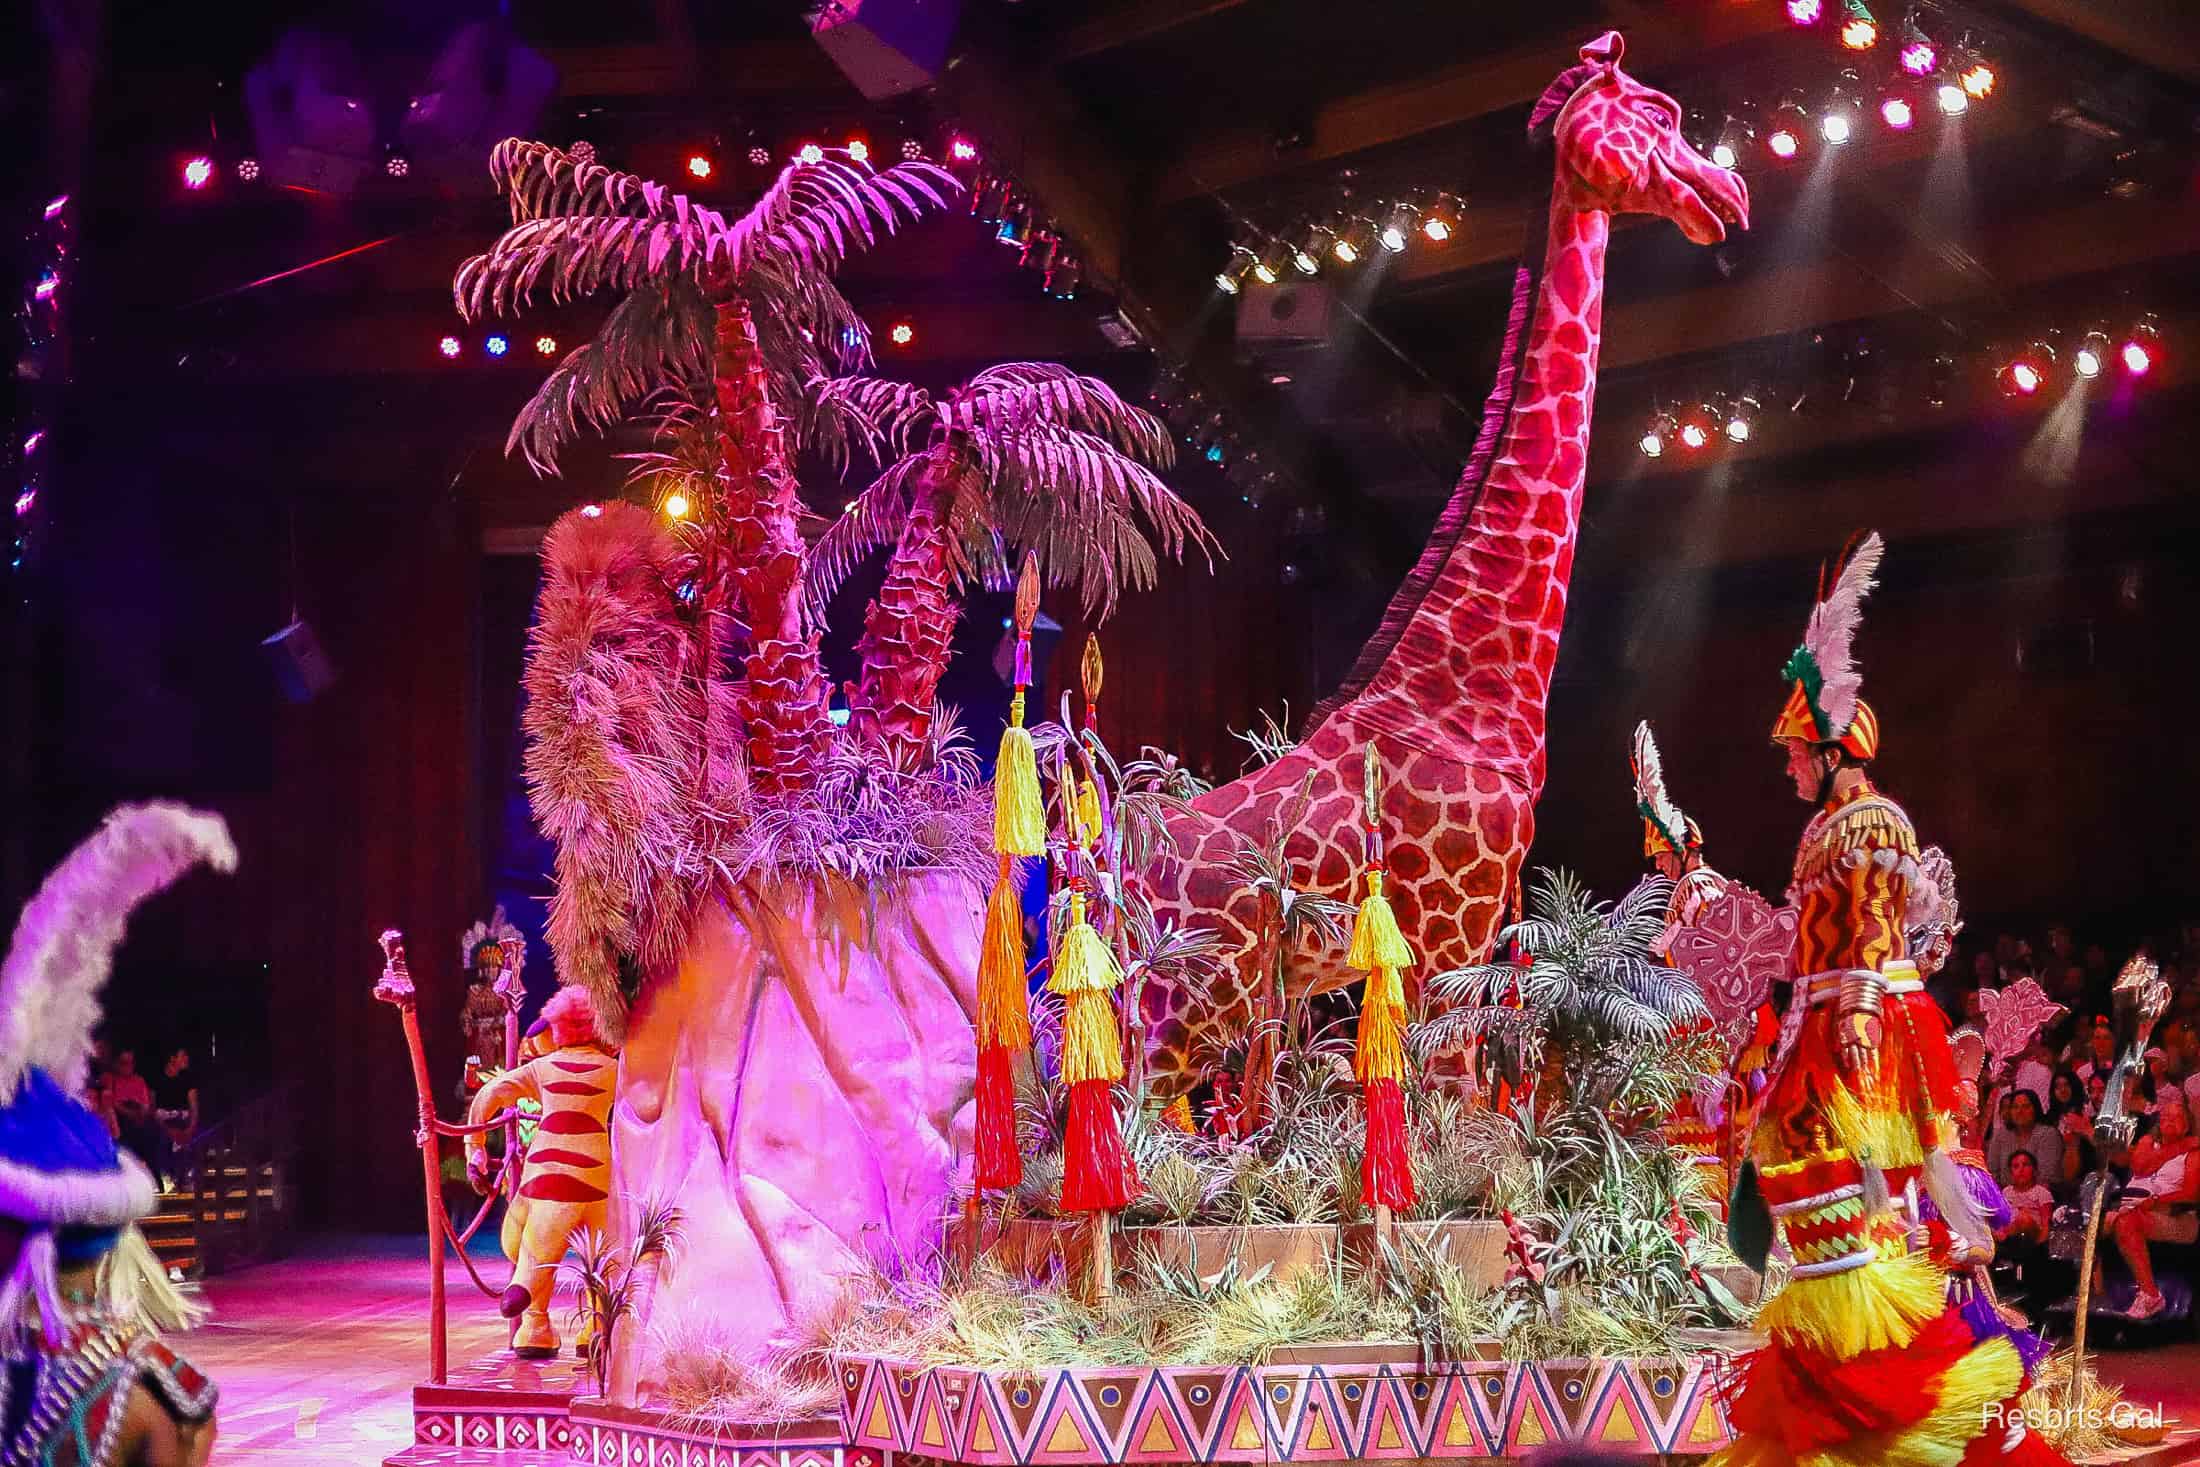 a giraffe represents one section of the audience 